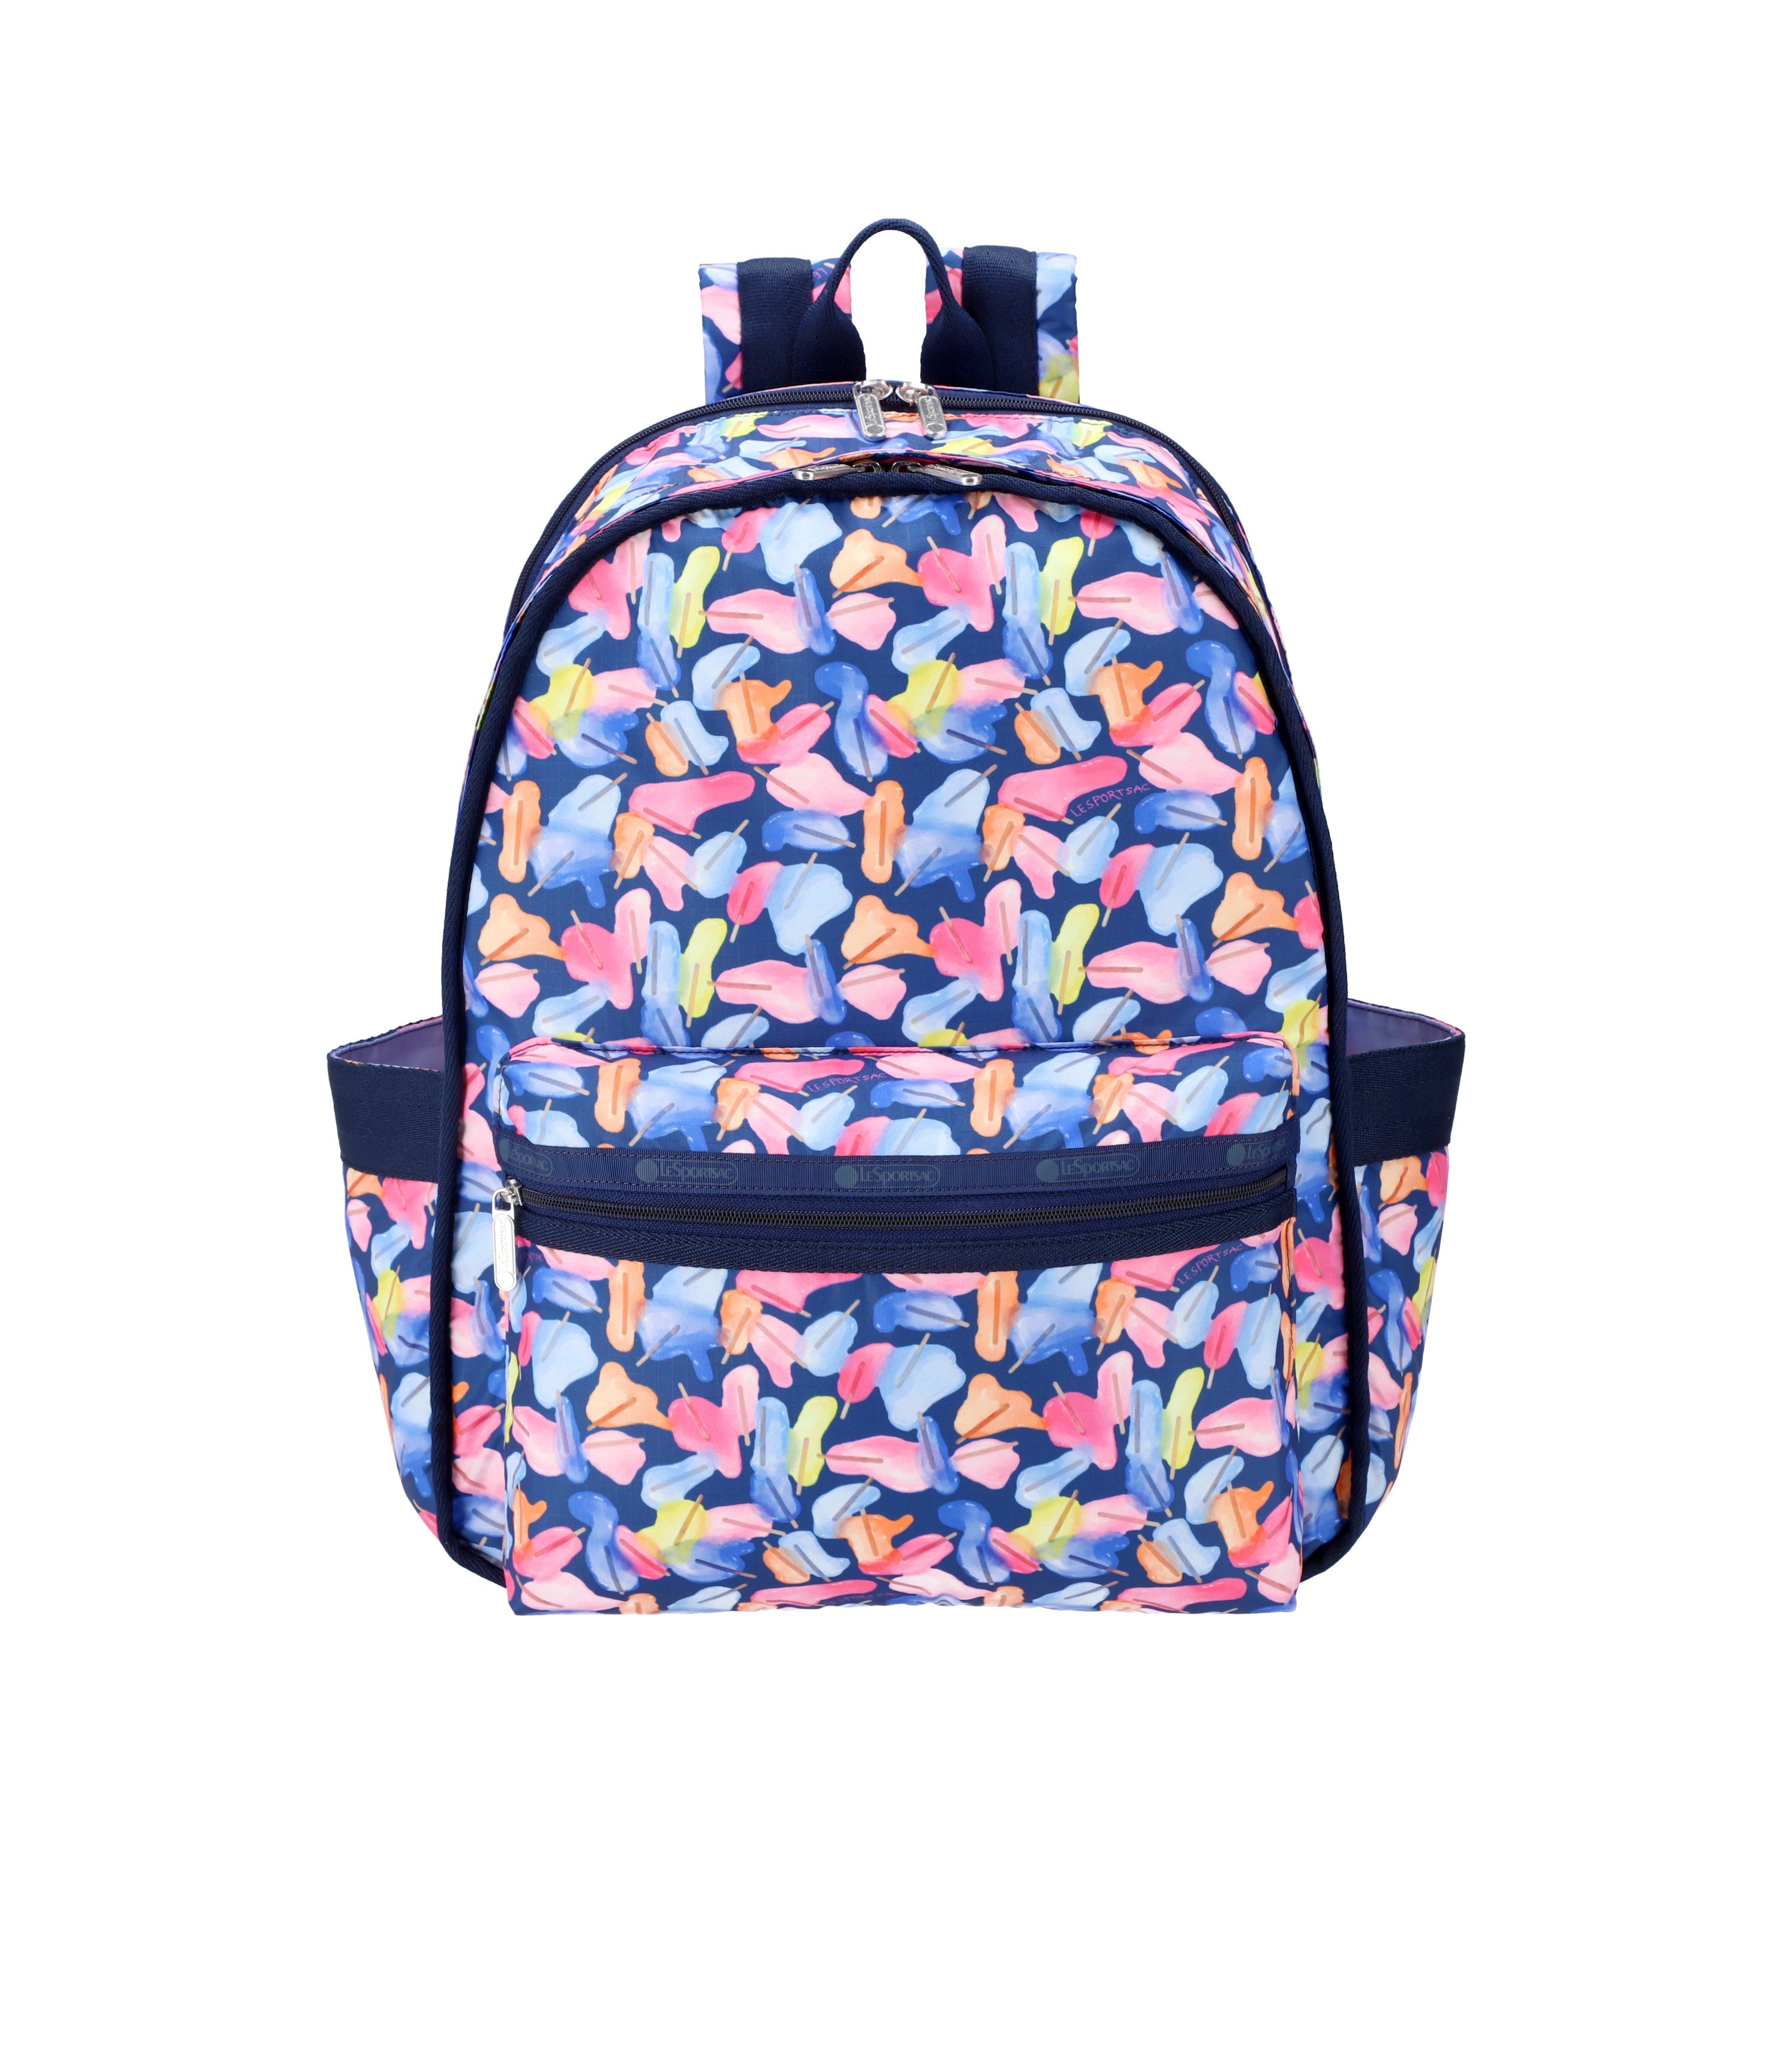 Route Backpack - Popsicle Mirage print – LeSportsac